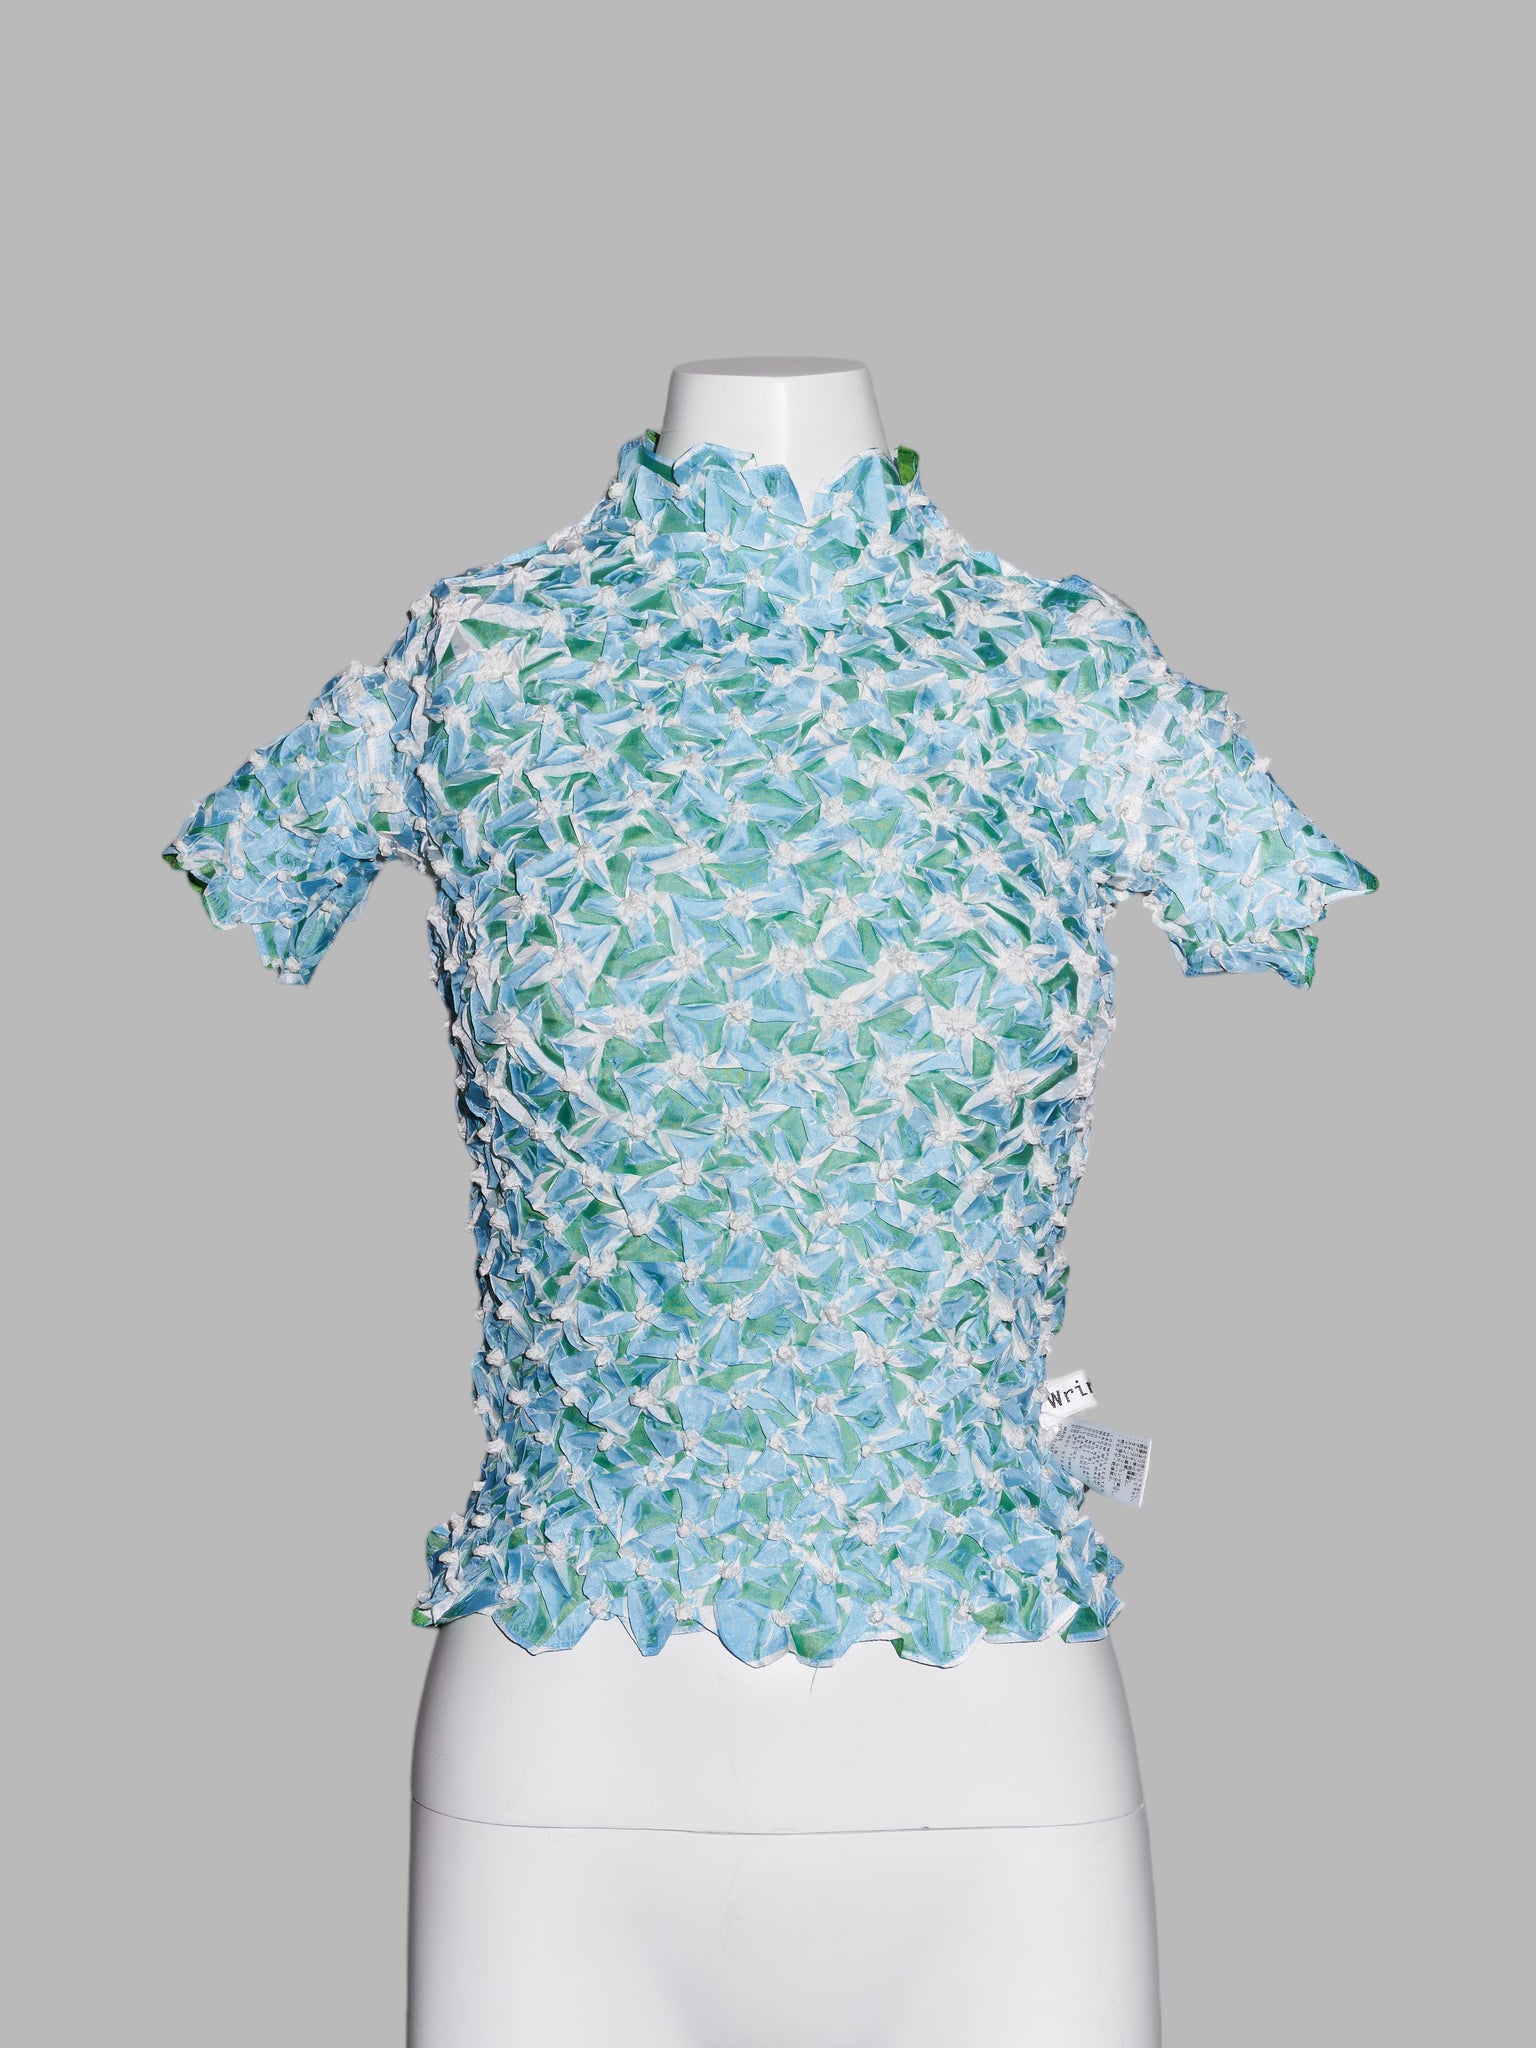 Wrinqle Inoue Pleats green blue wrinkled polyester 3D high neck top